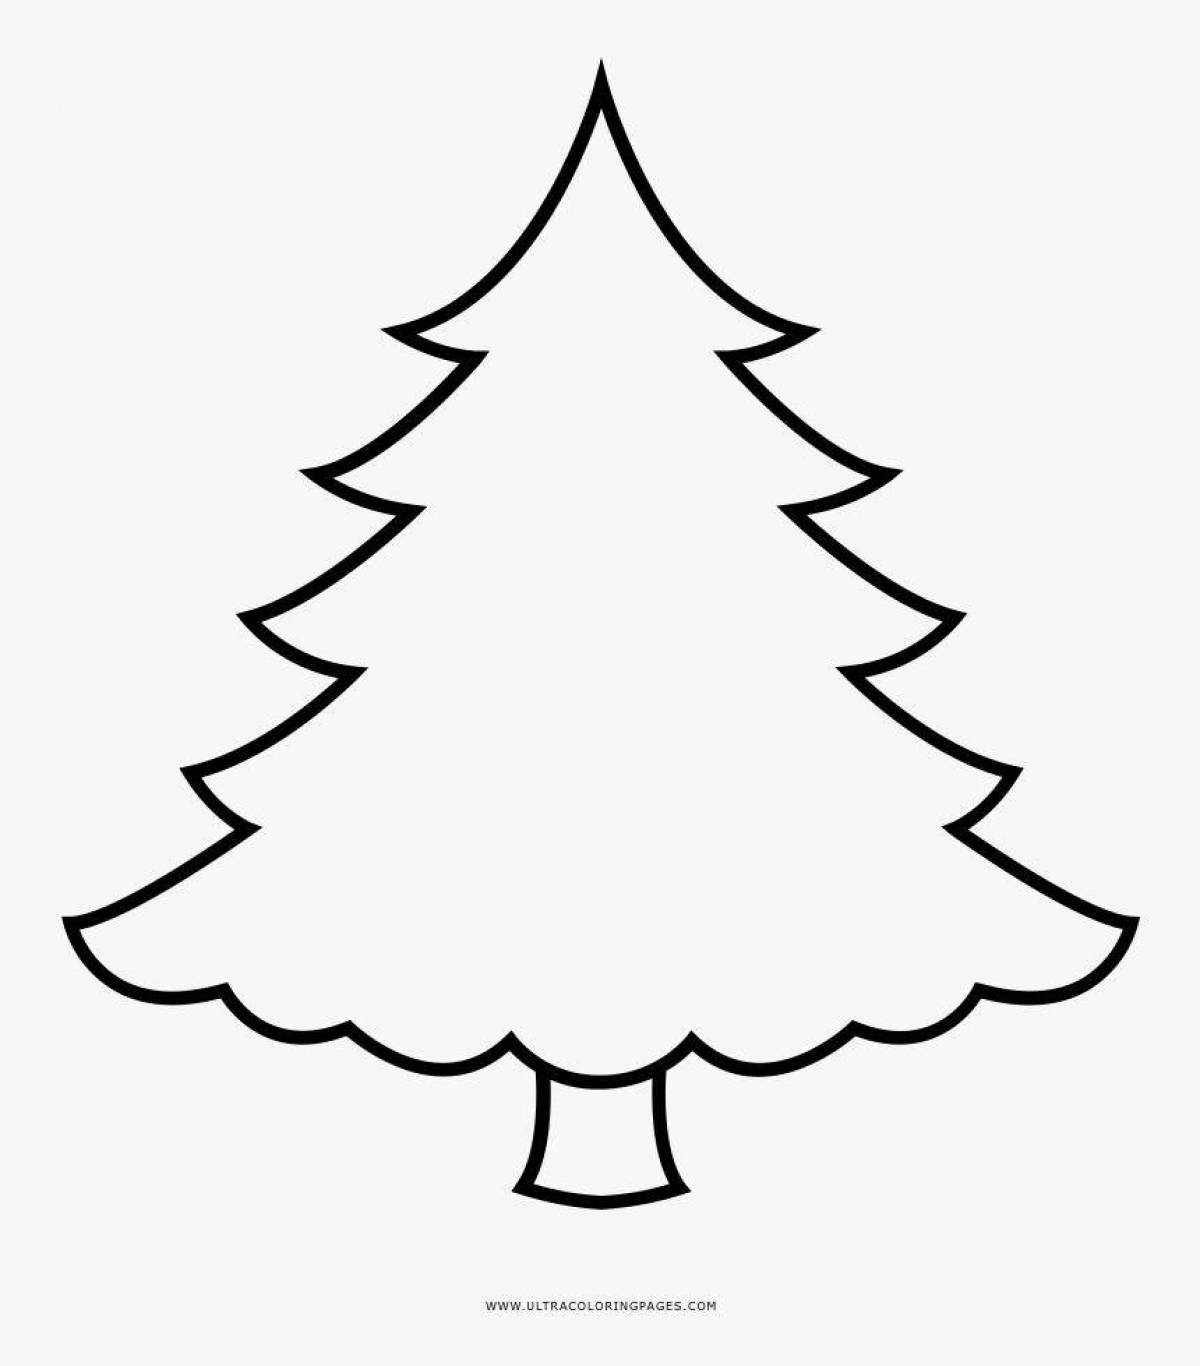 Creative Christmas tree coloring page